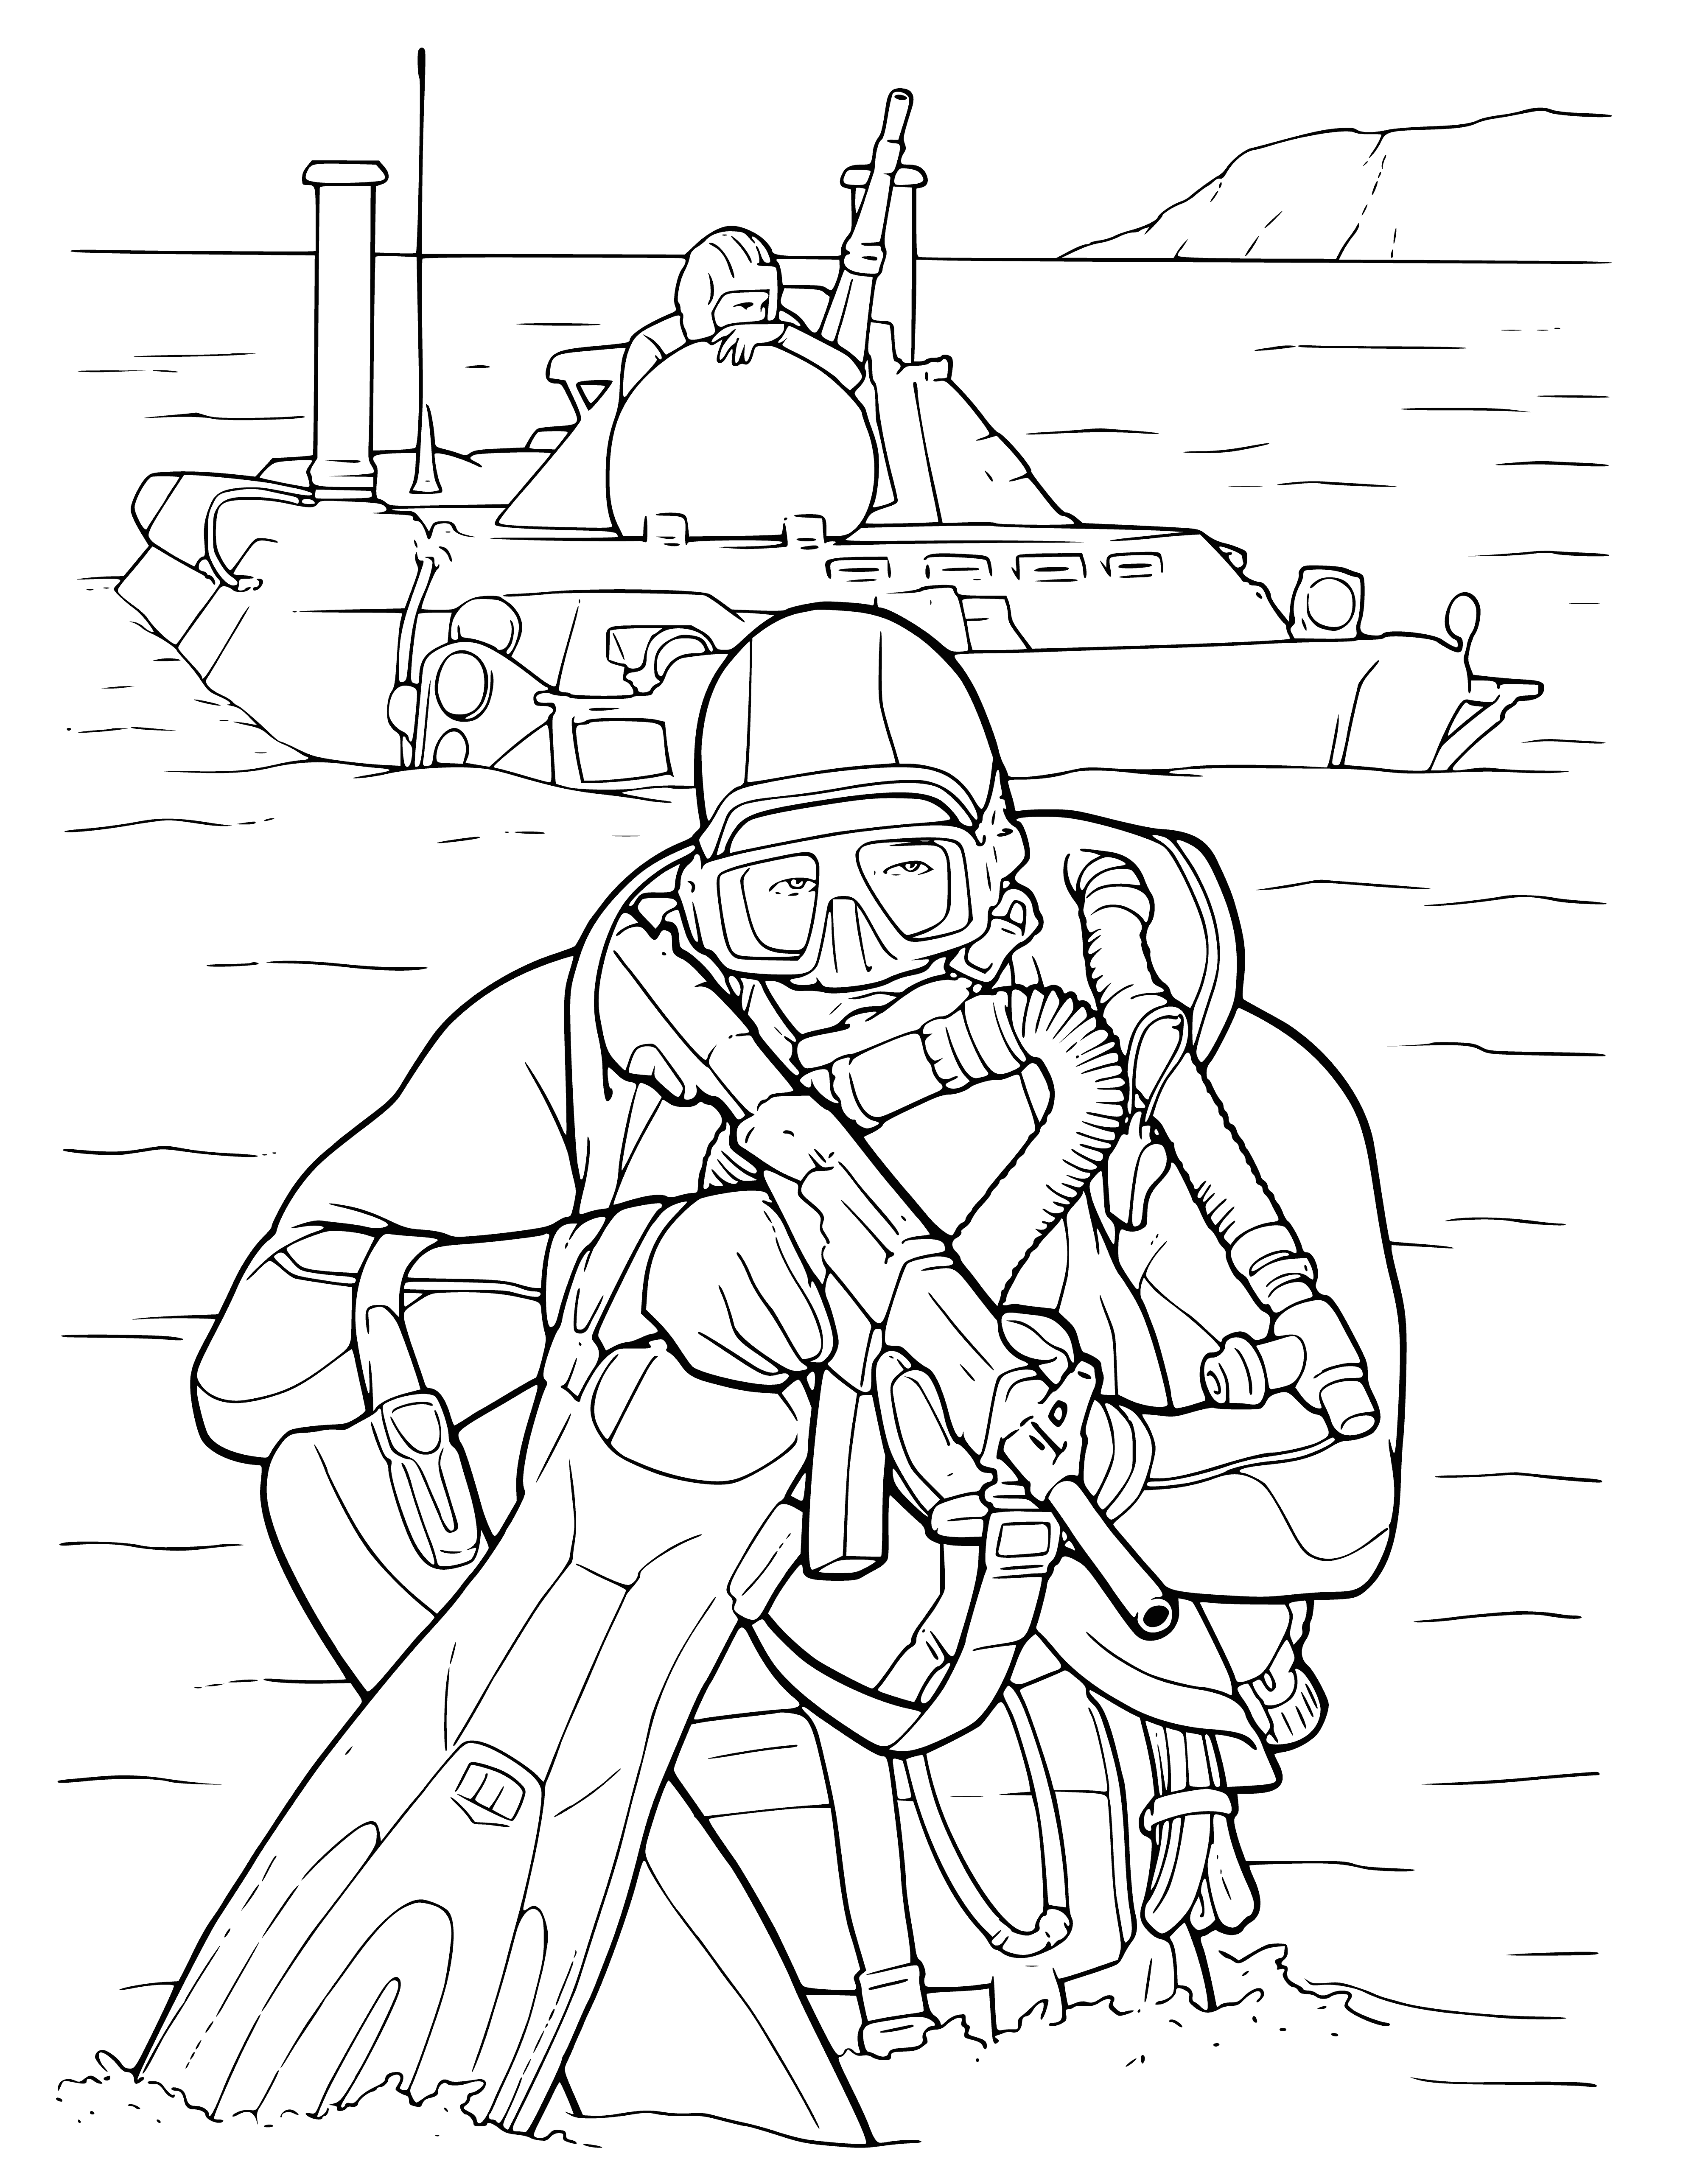 coloring page: Marines march in formation towards dockside ship, ready to take them into battle.